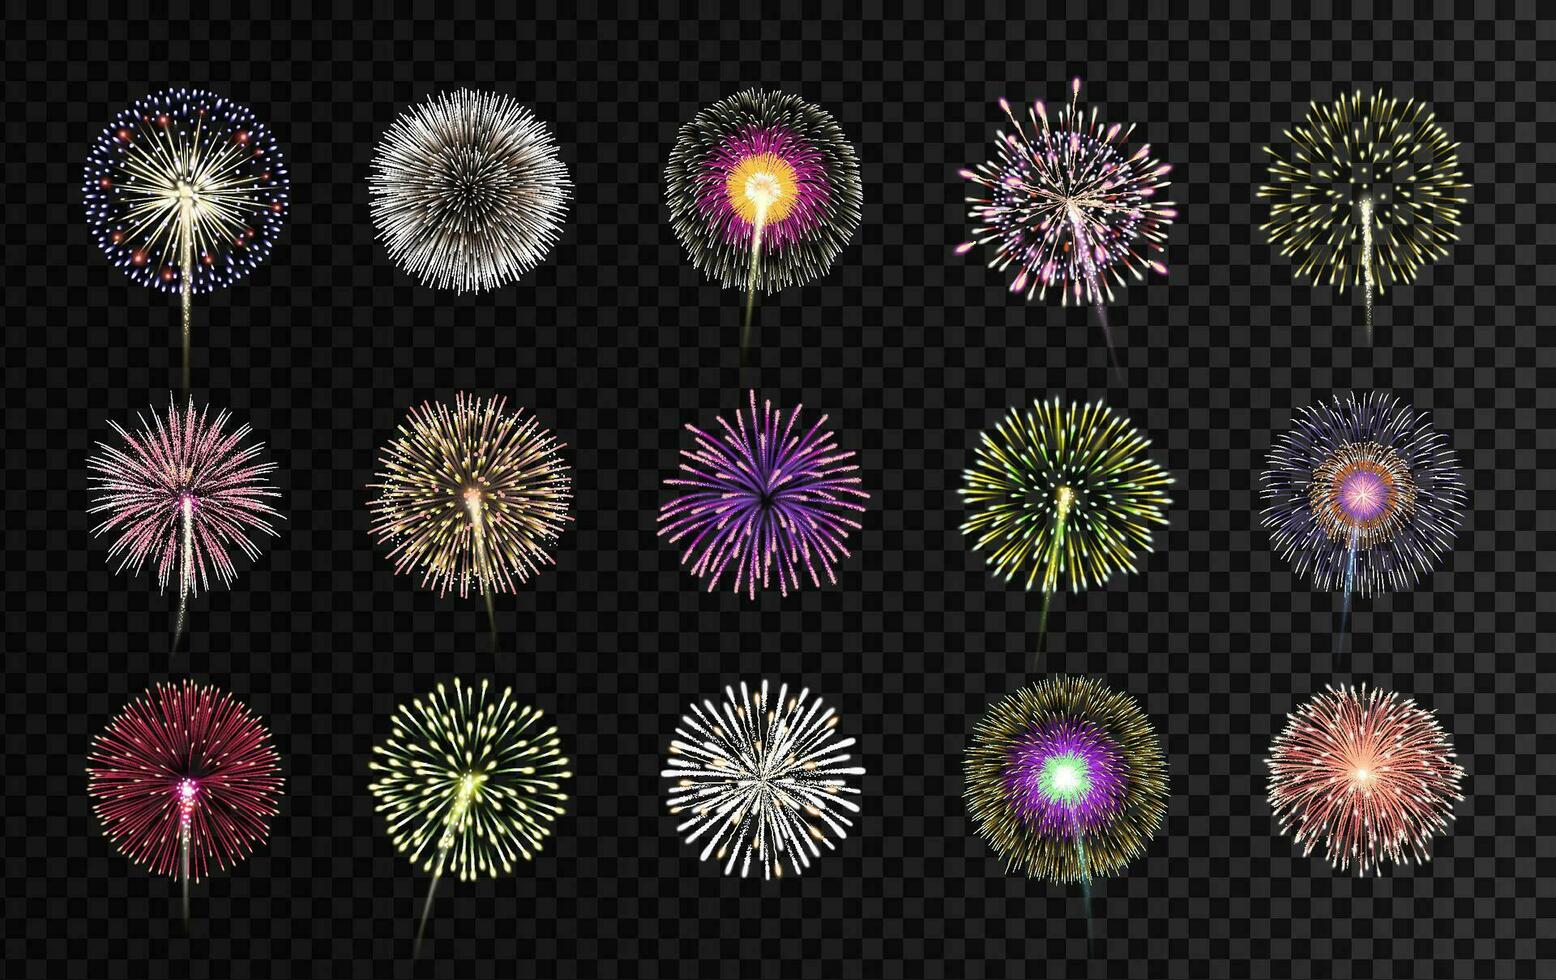 Colorful fireworks display realistic isolated vector illustration. Celebrating, birthday and new year decorations.